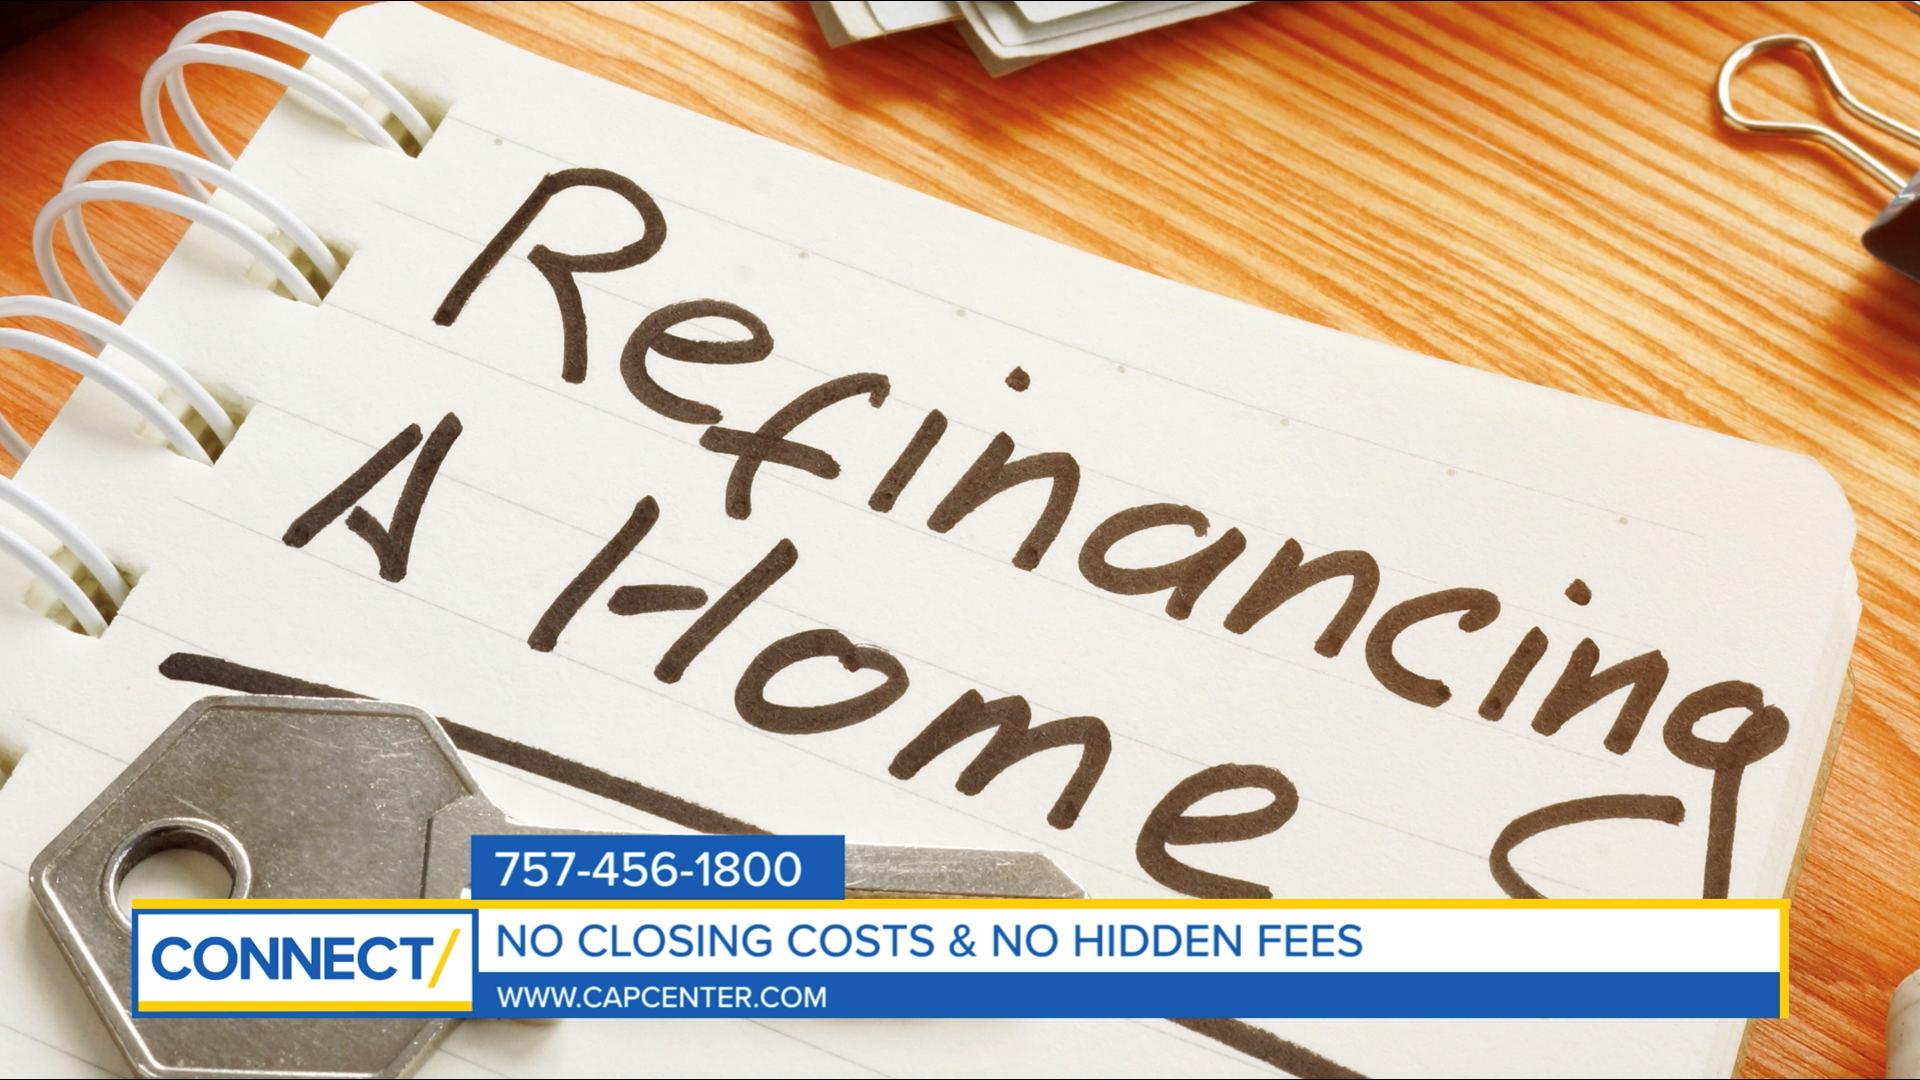 Homeowners! Take advantage of low interest rates. Ask CapCenter about refinancing with zero closing costs and no hidden fees!